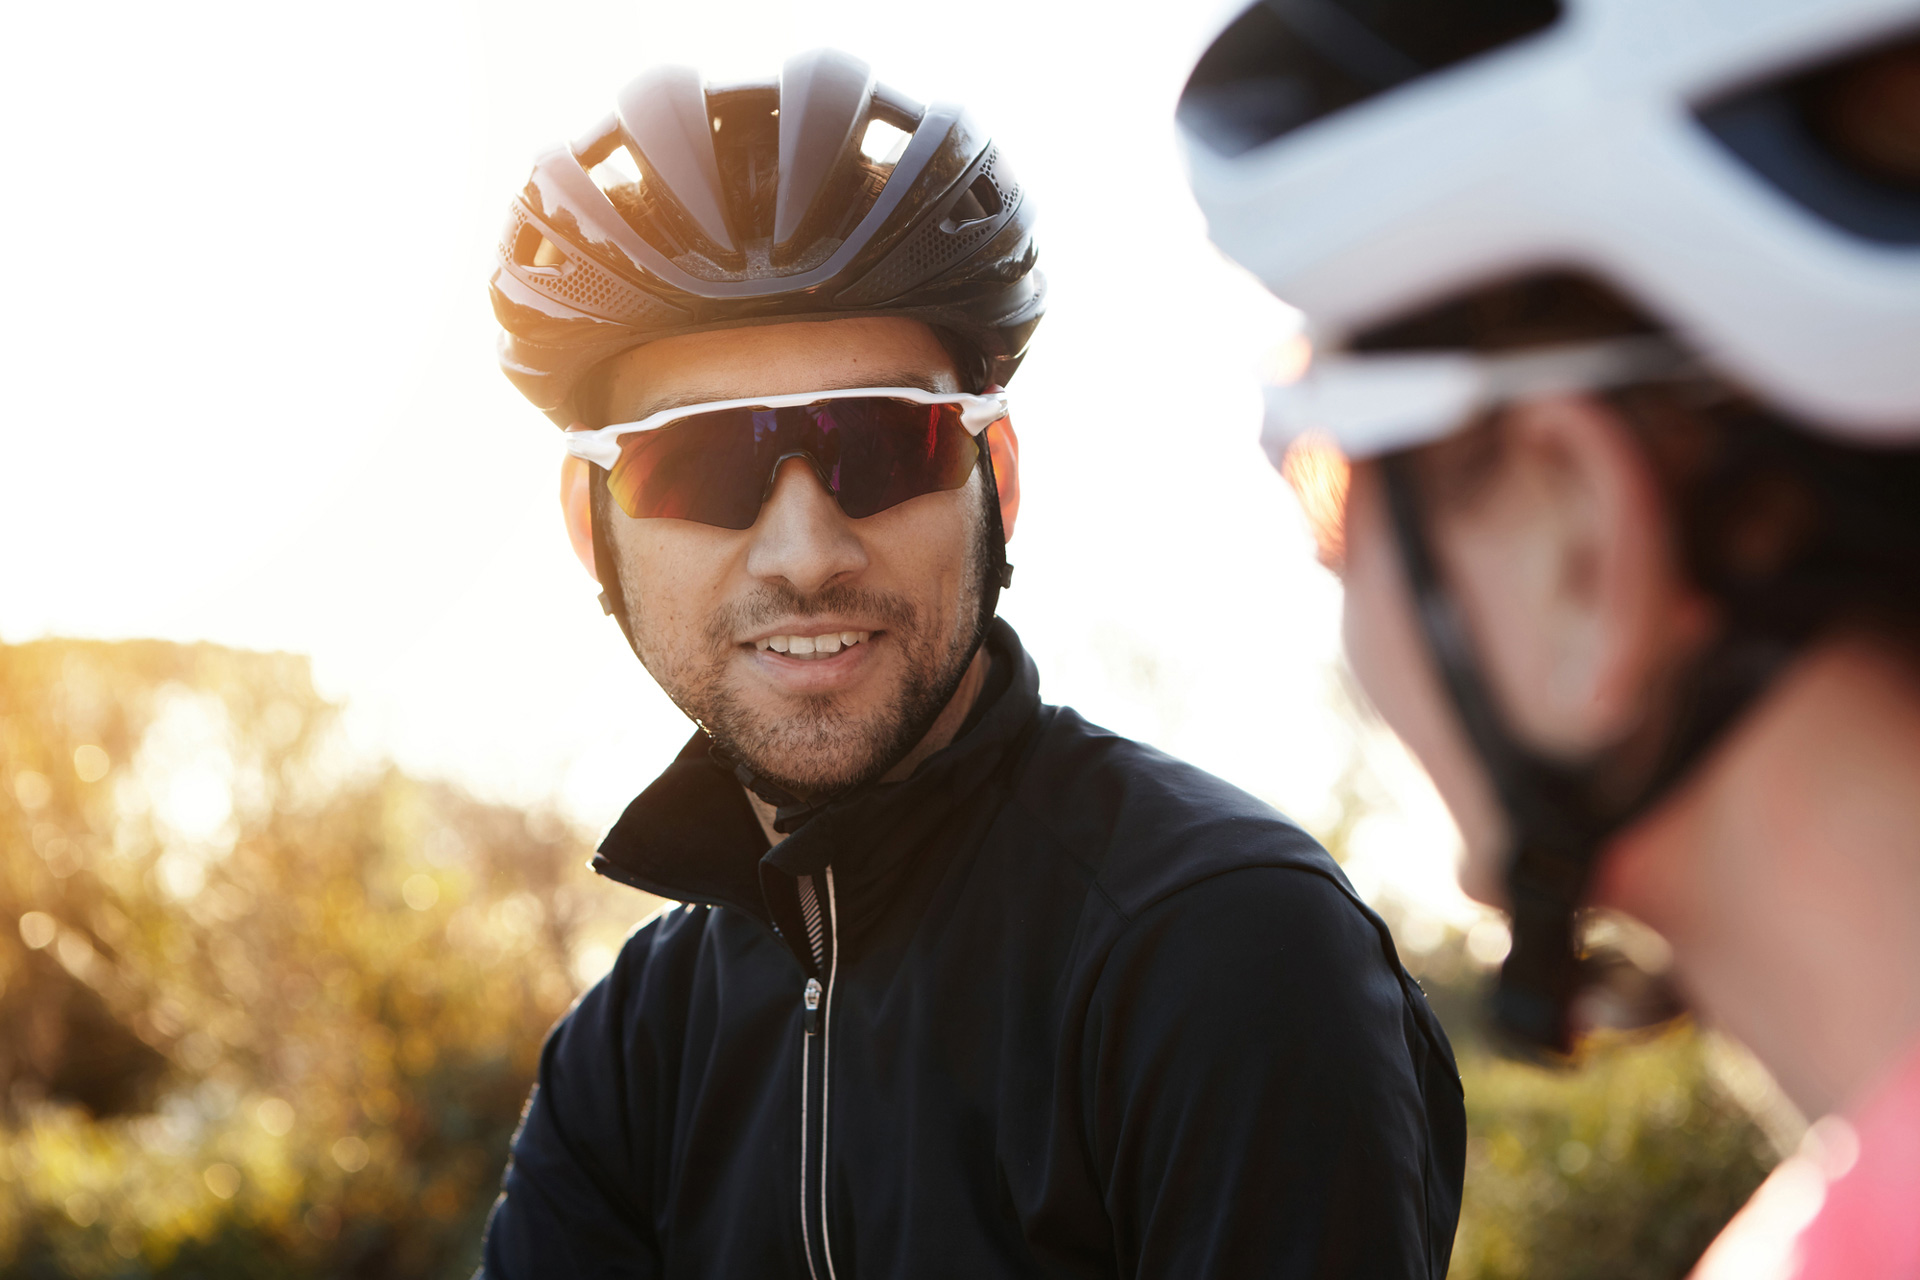 Customised sports sunglasses can significantly influence your vision and performance.